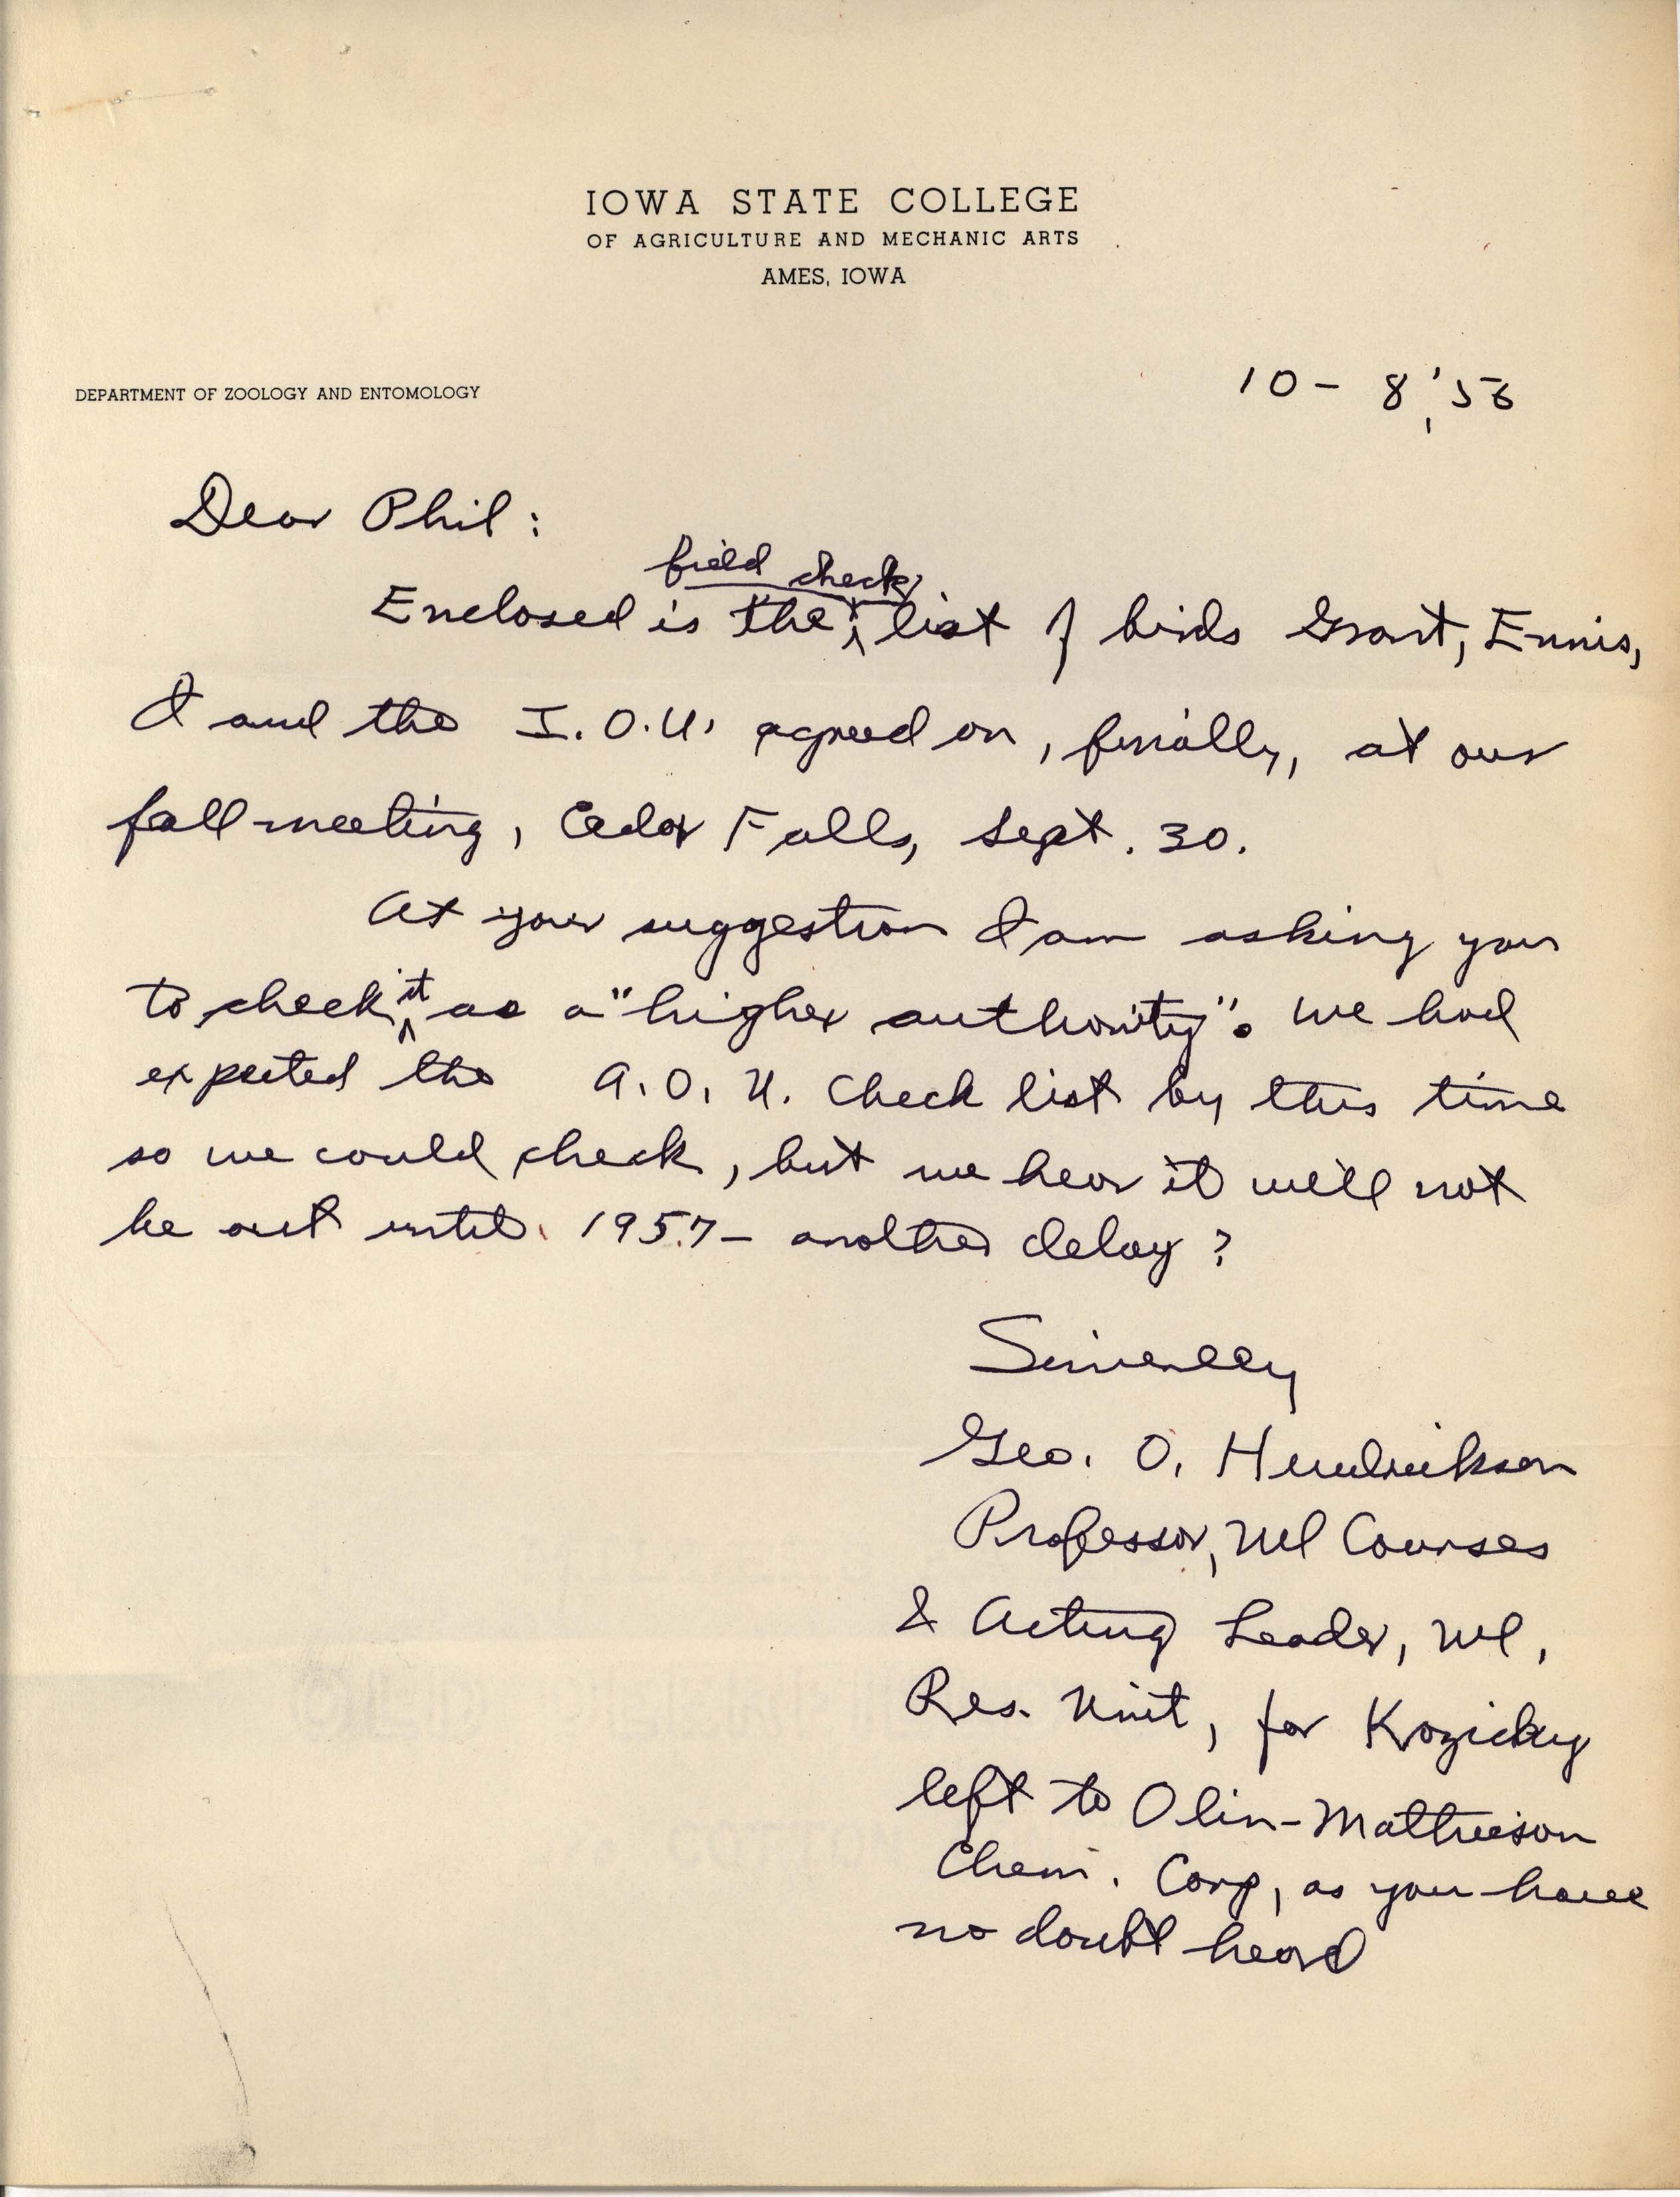 George Hendrickson letter to Philip DuMont regarding final review for a revised checklist, October 8, 1956